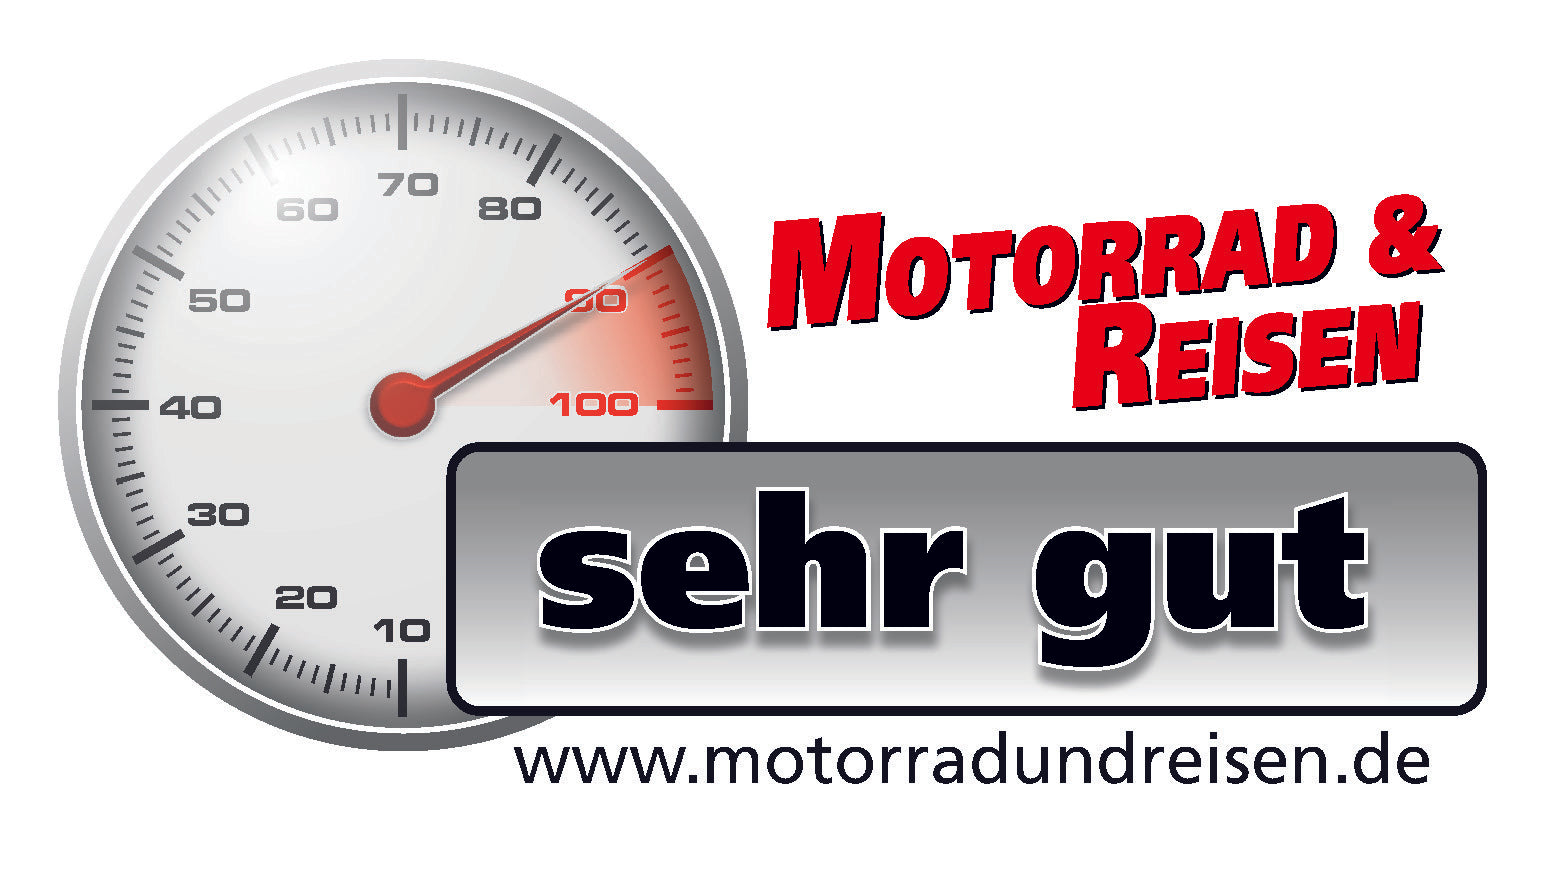 The Head Up Display was rated Very Good by Motorrad & Reisen magazine.